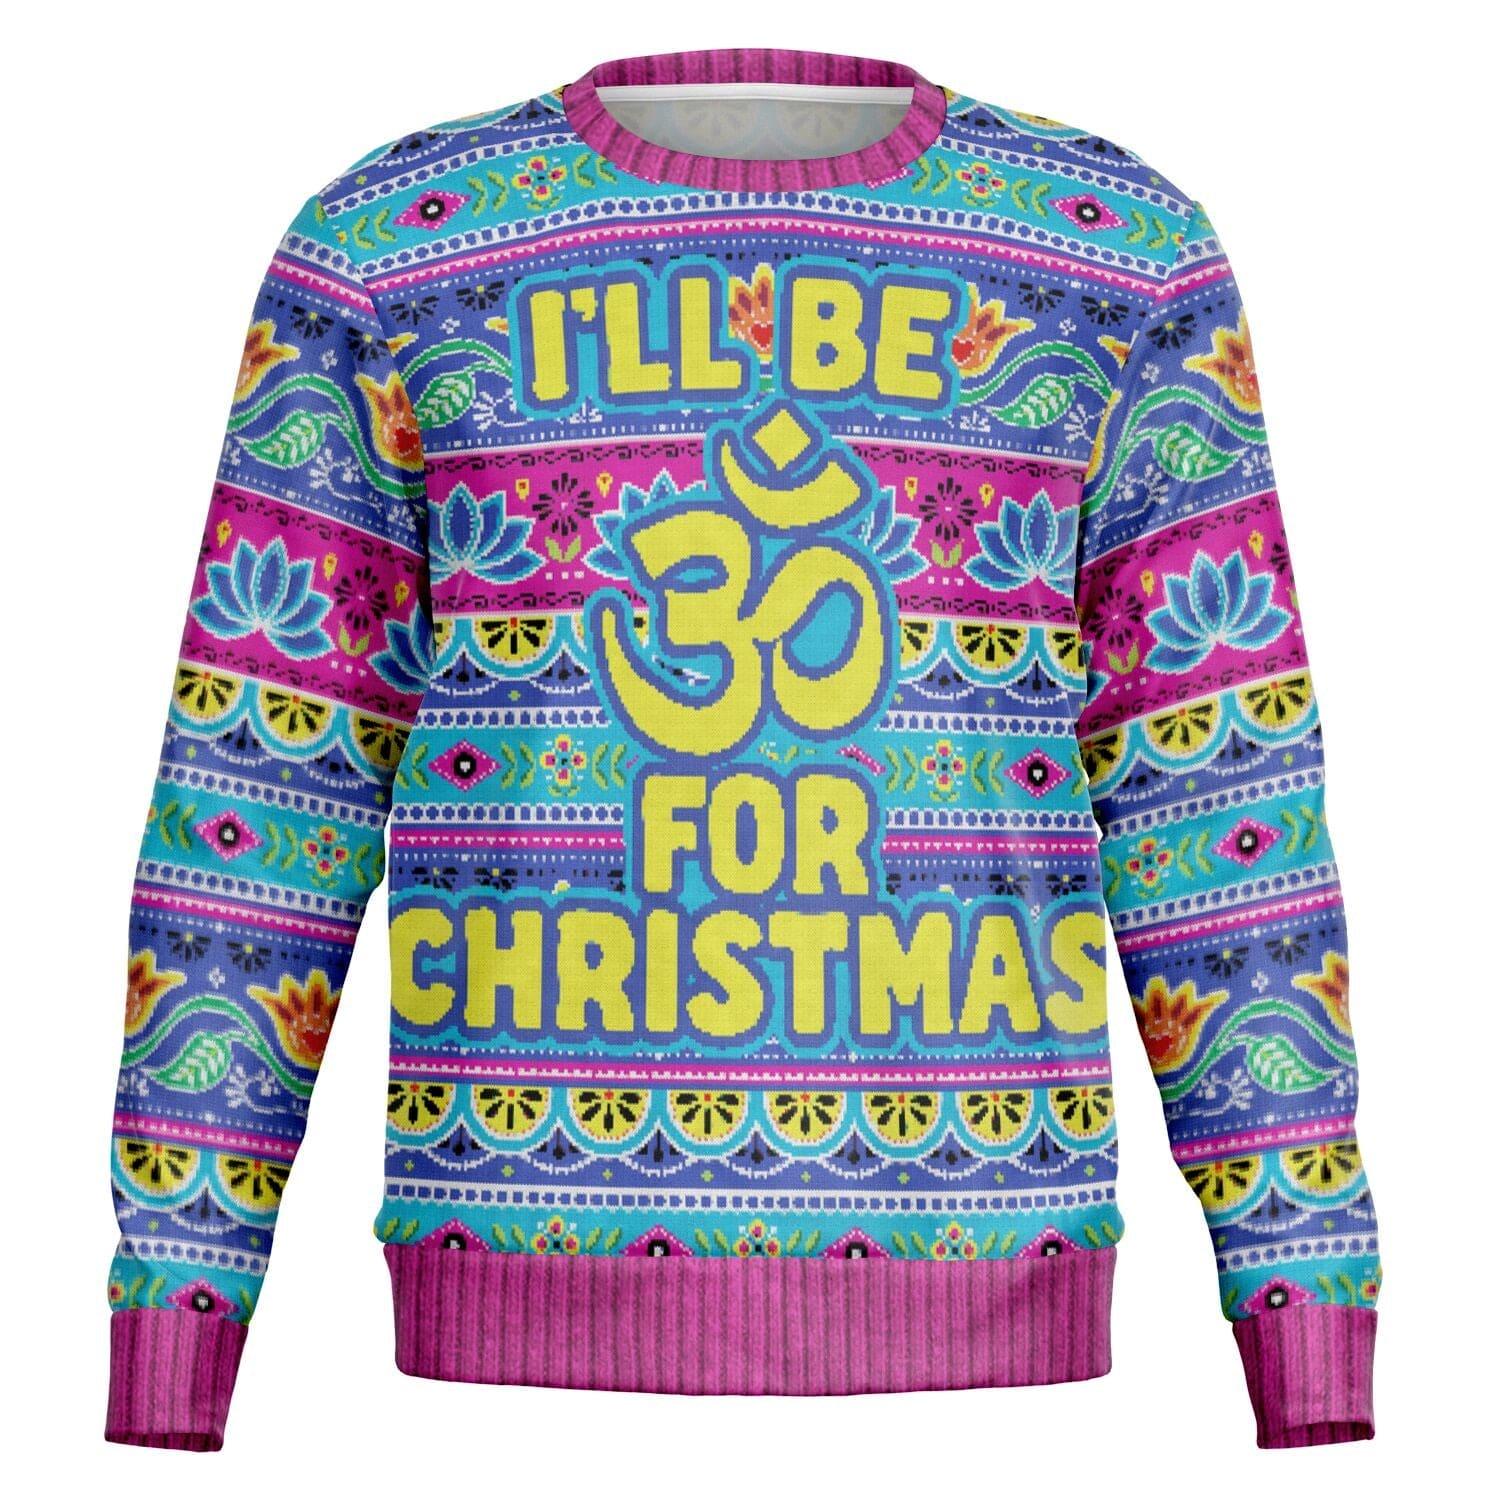 ill-be-30-for-christmas-unisex-ugly-christmas-sweater